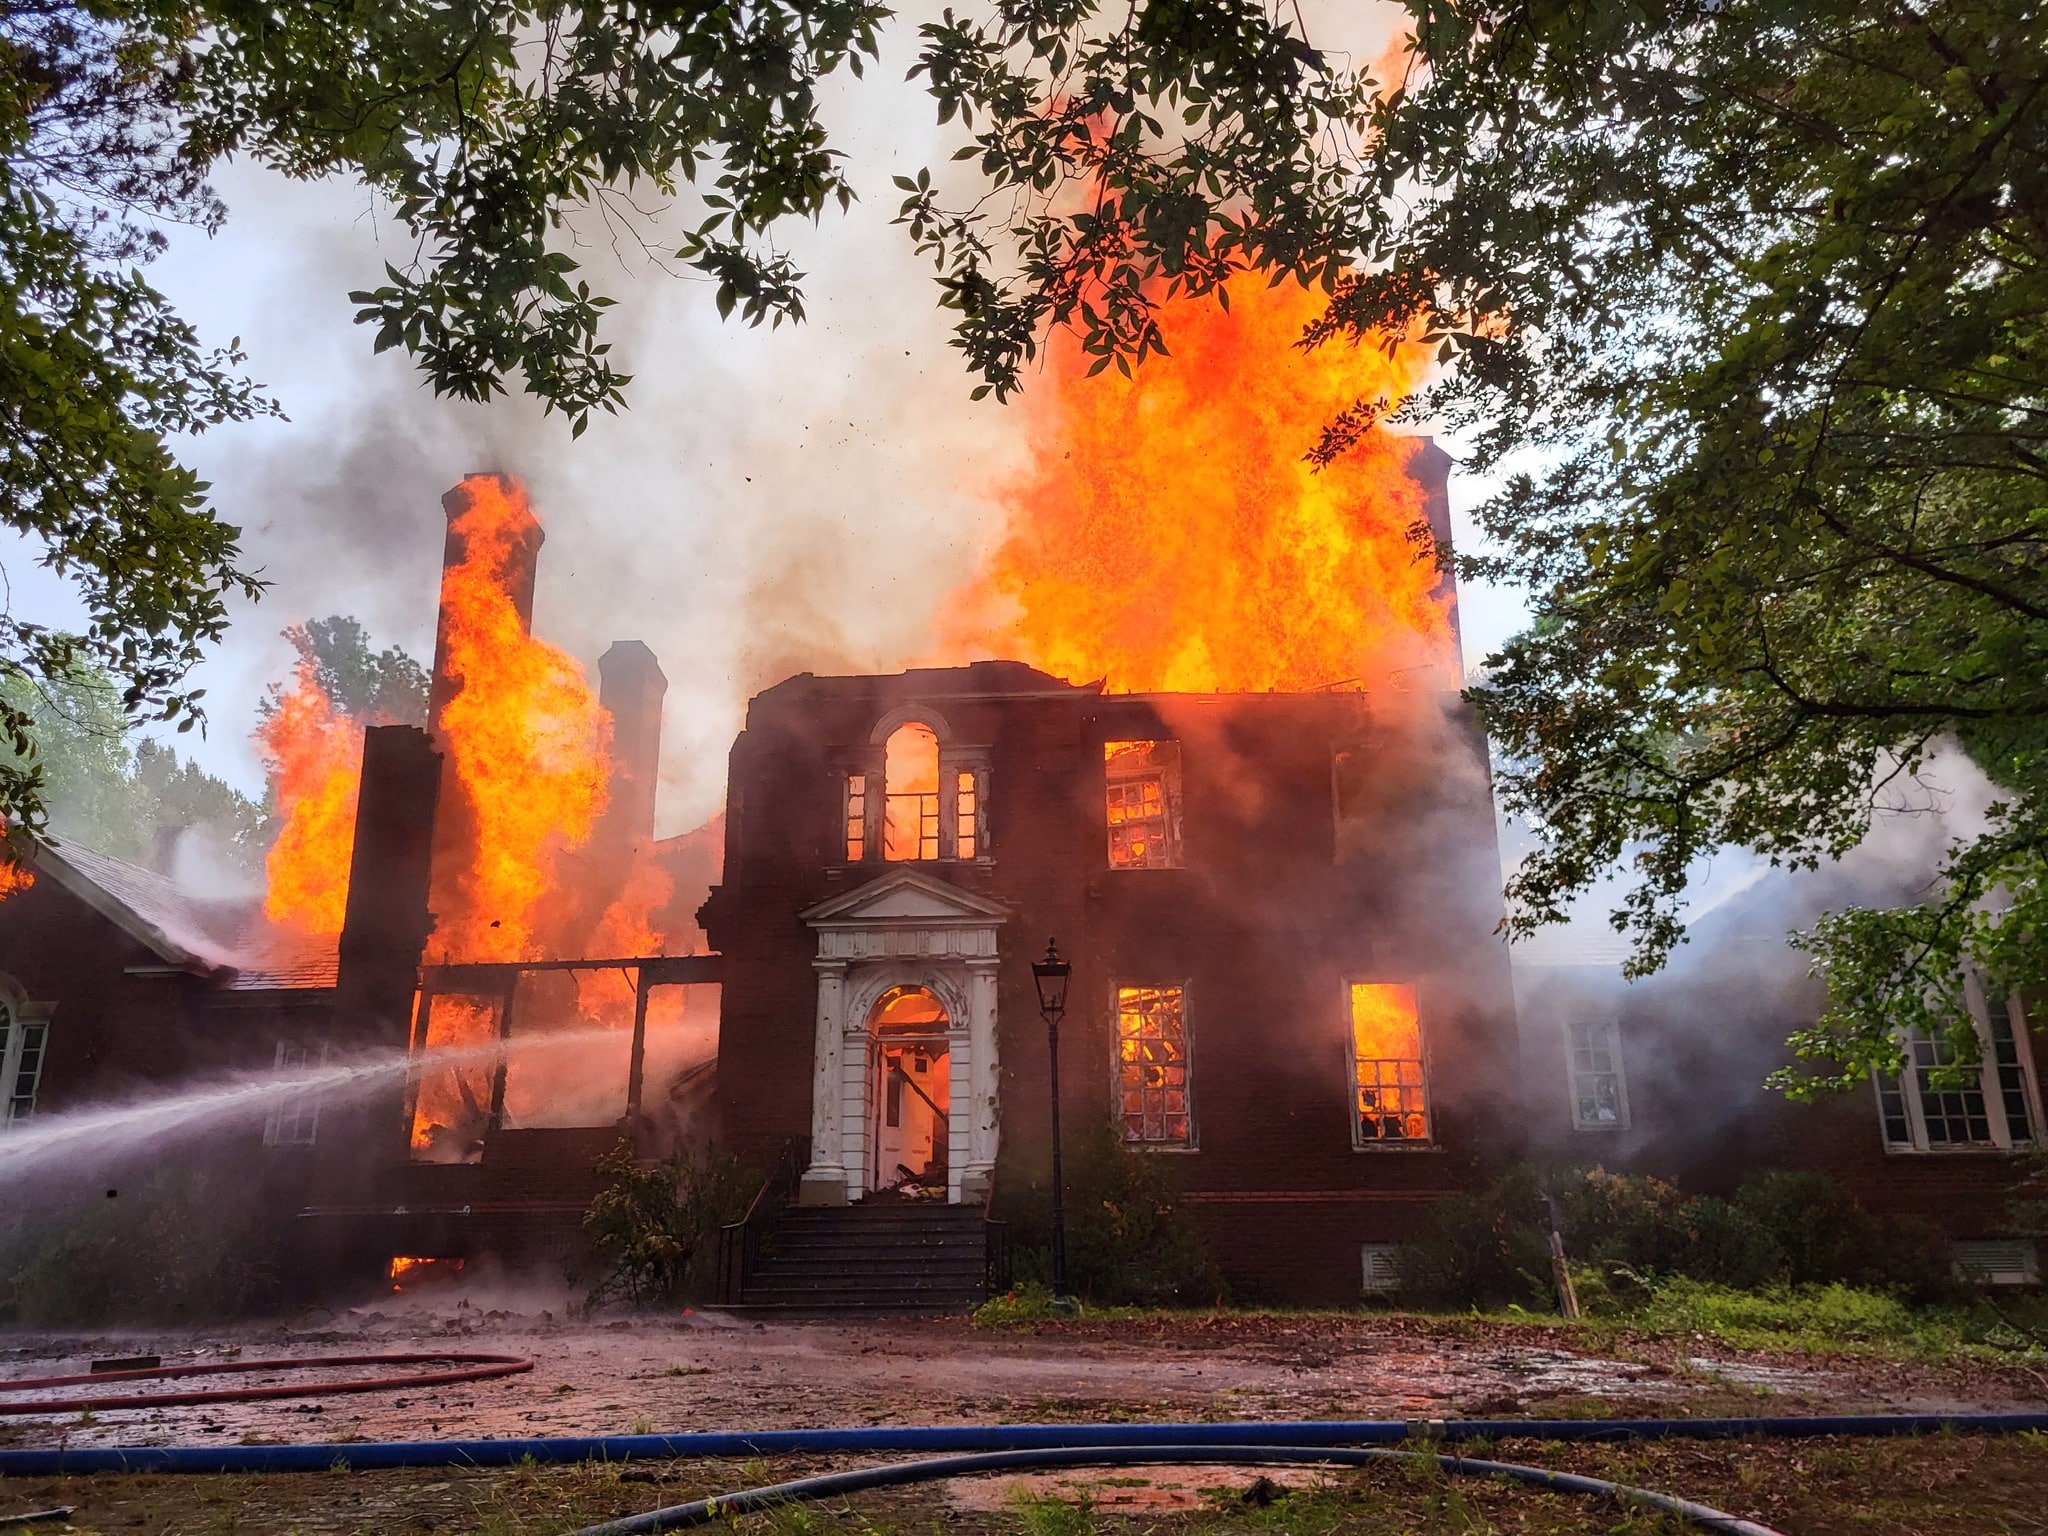 Photos: From Beauty to Ashes - A closer look at the Georgia mansion fire